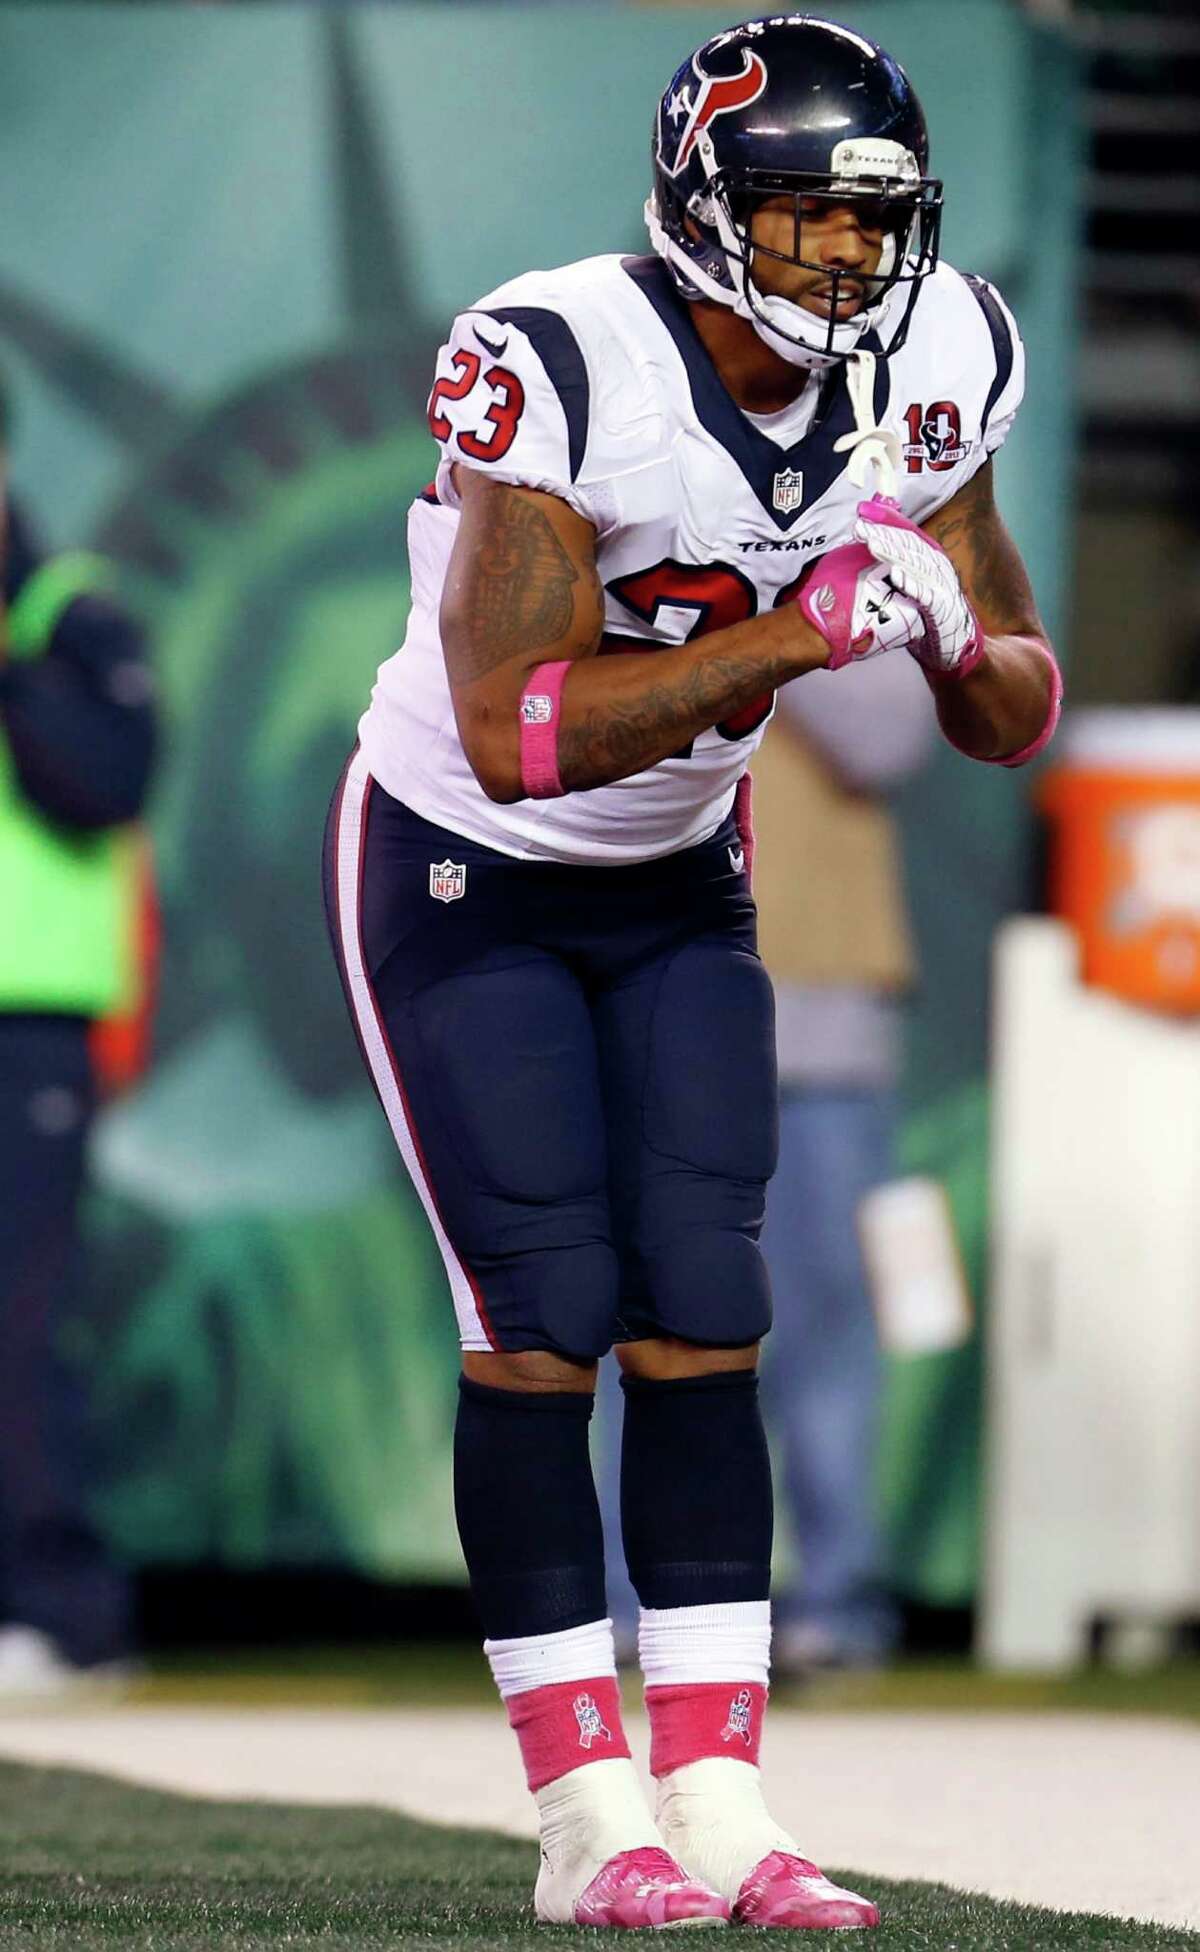 Houston Texans running back Arian Foster (23) celebrates after rushing for a touchdown during the first half of an NFL football game against the New York Jets, Monday, Oct. 8, 2012, in East Rutherford, N.J. (AP Photo/Julio Cortez)